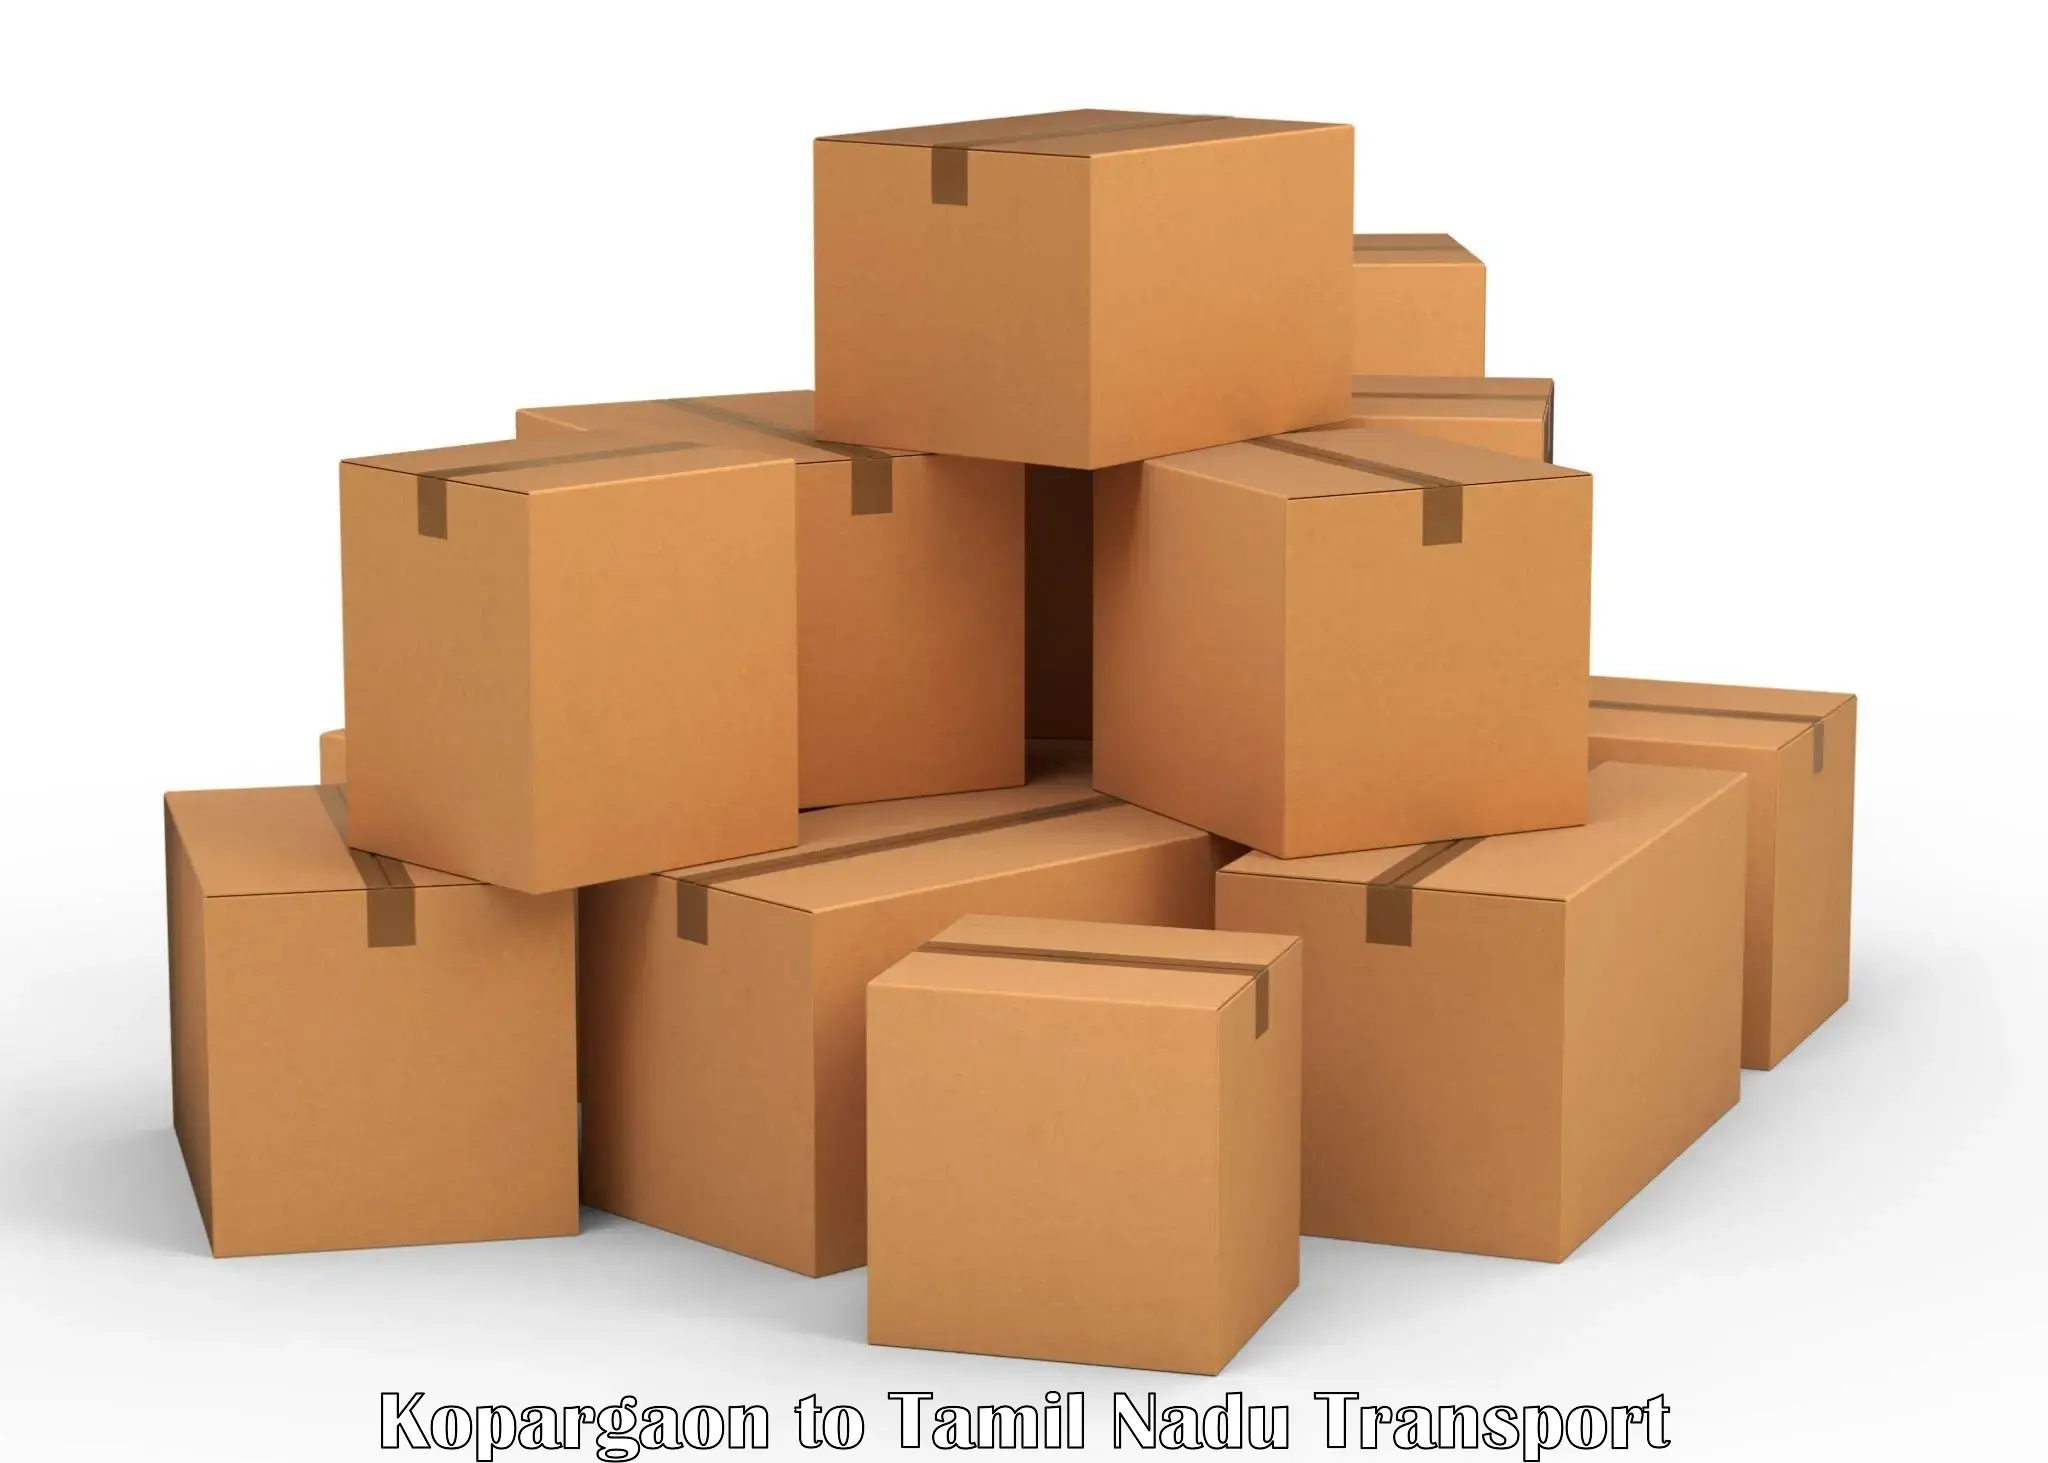 Truck transport companies in India Kopargaon to Ennore Port Chennai